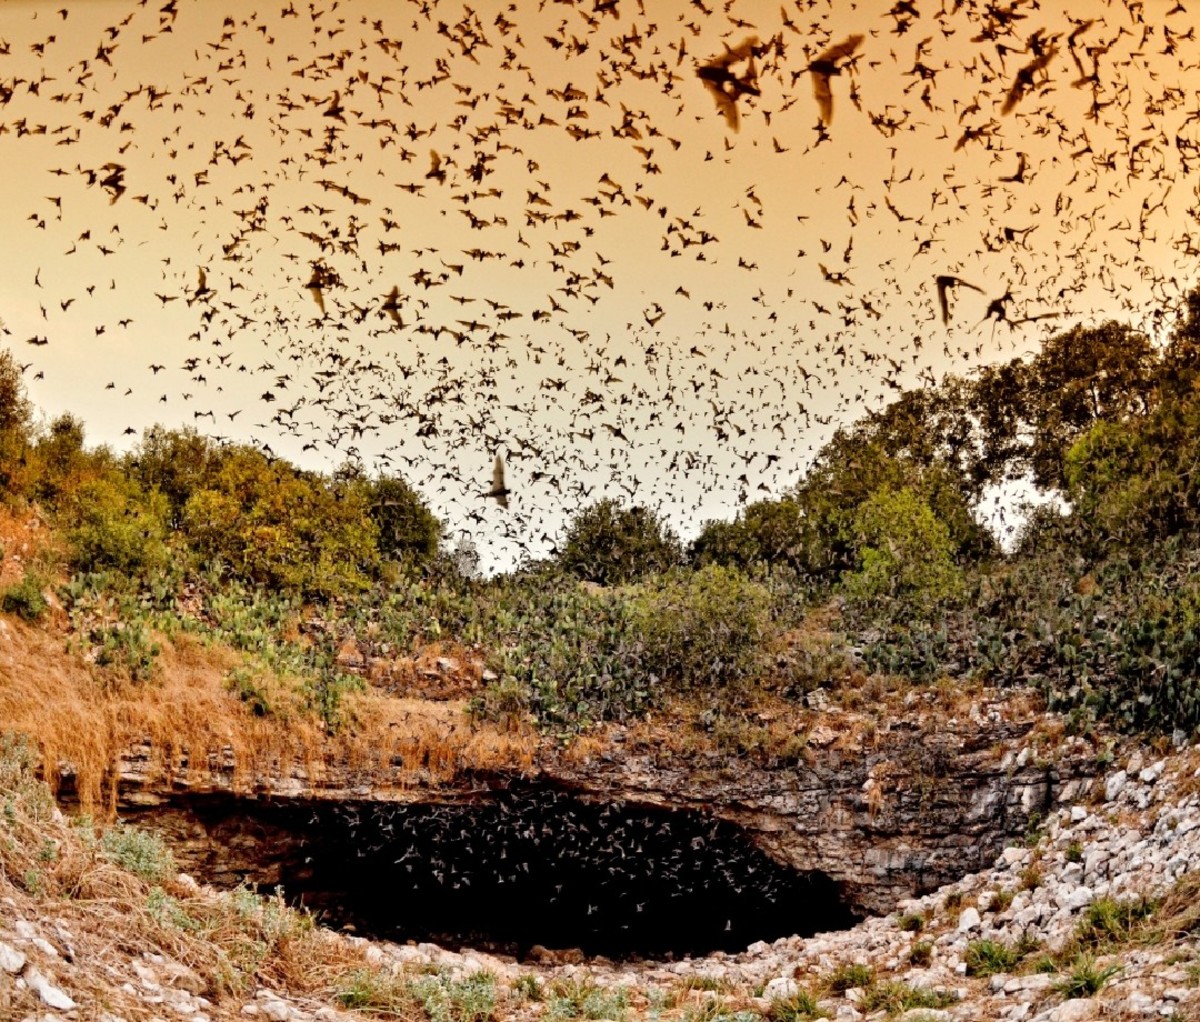 Many, many bats fly around the entrance of Bracken Cave in Texas.